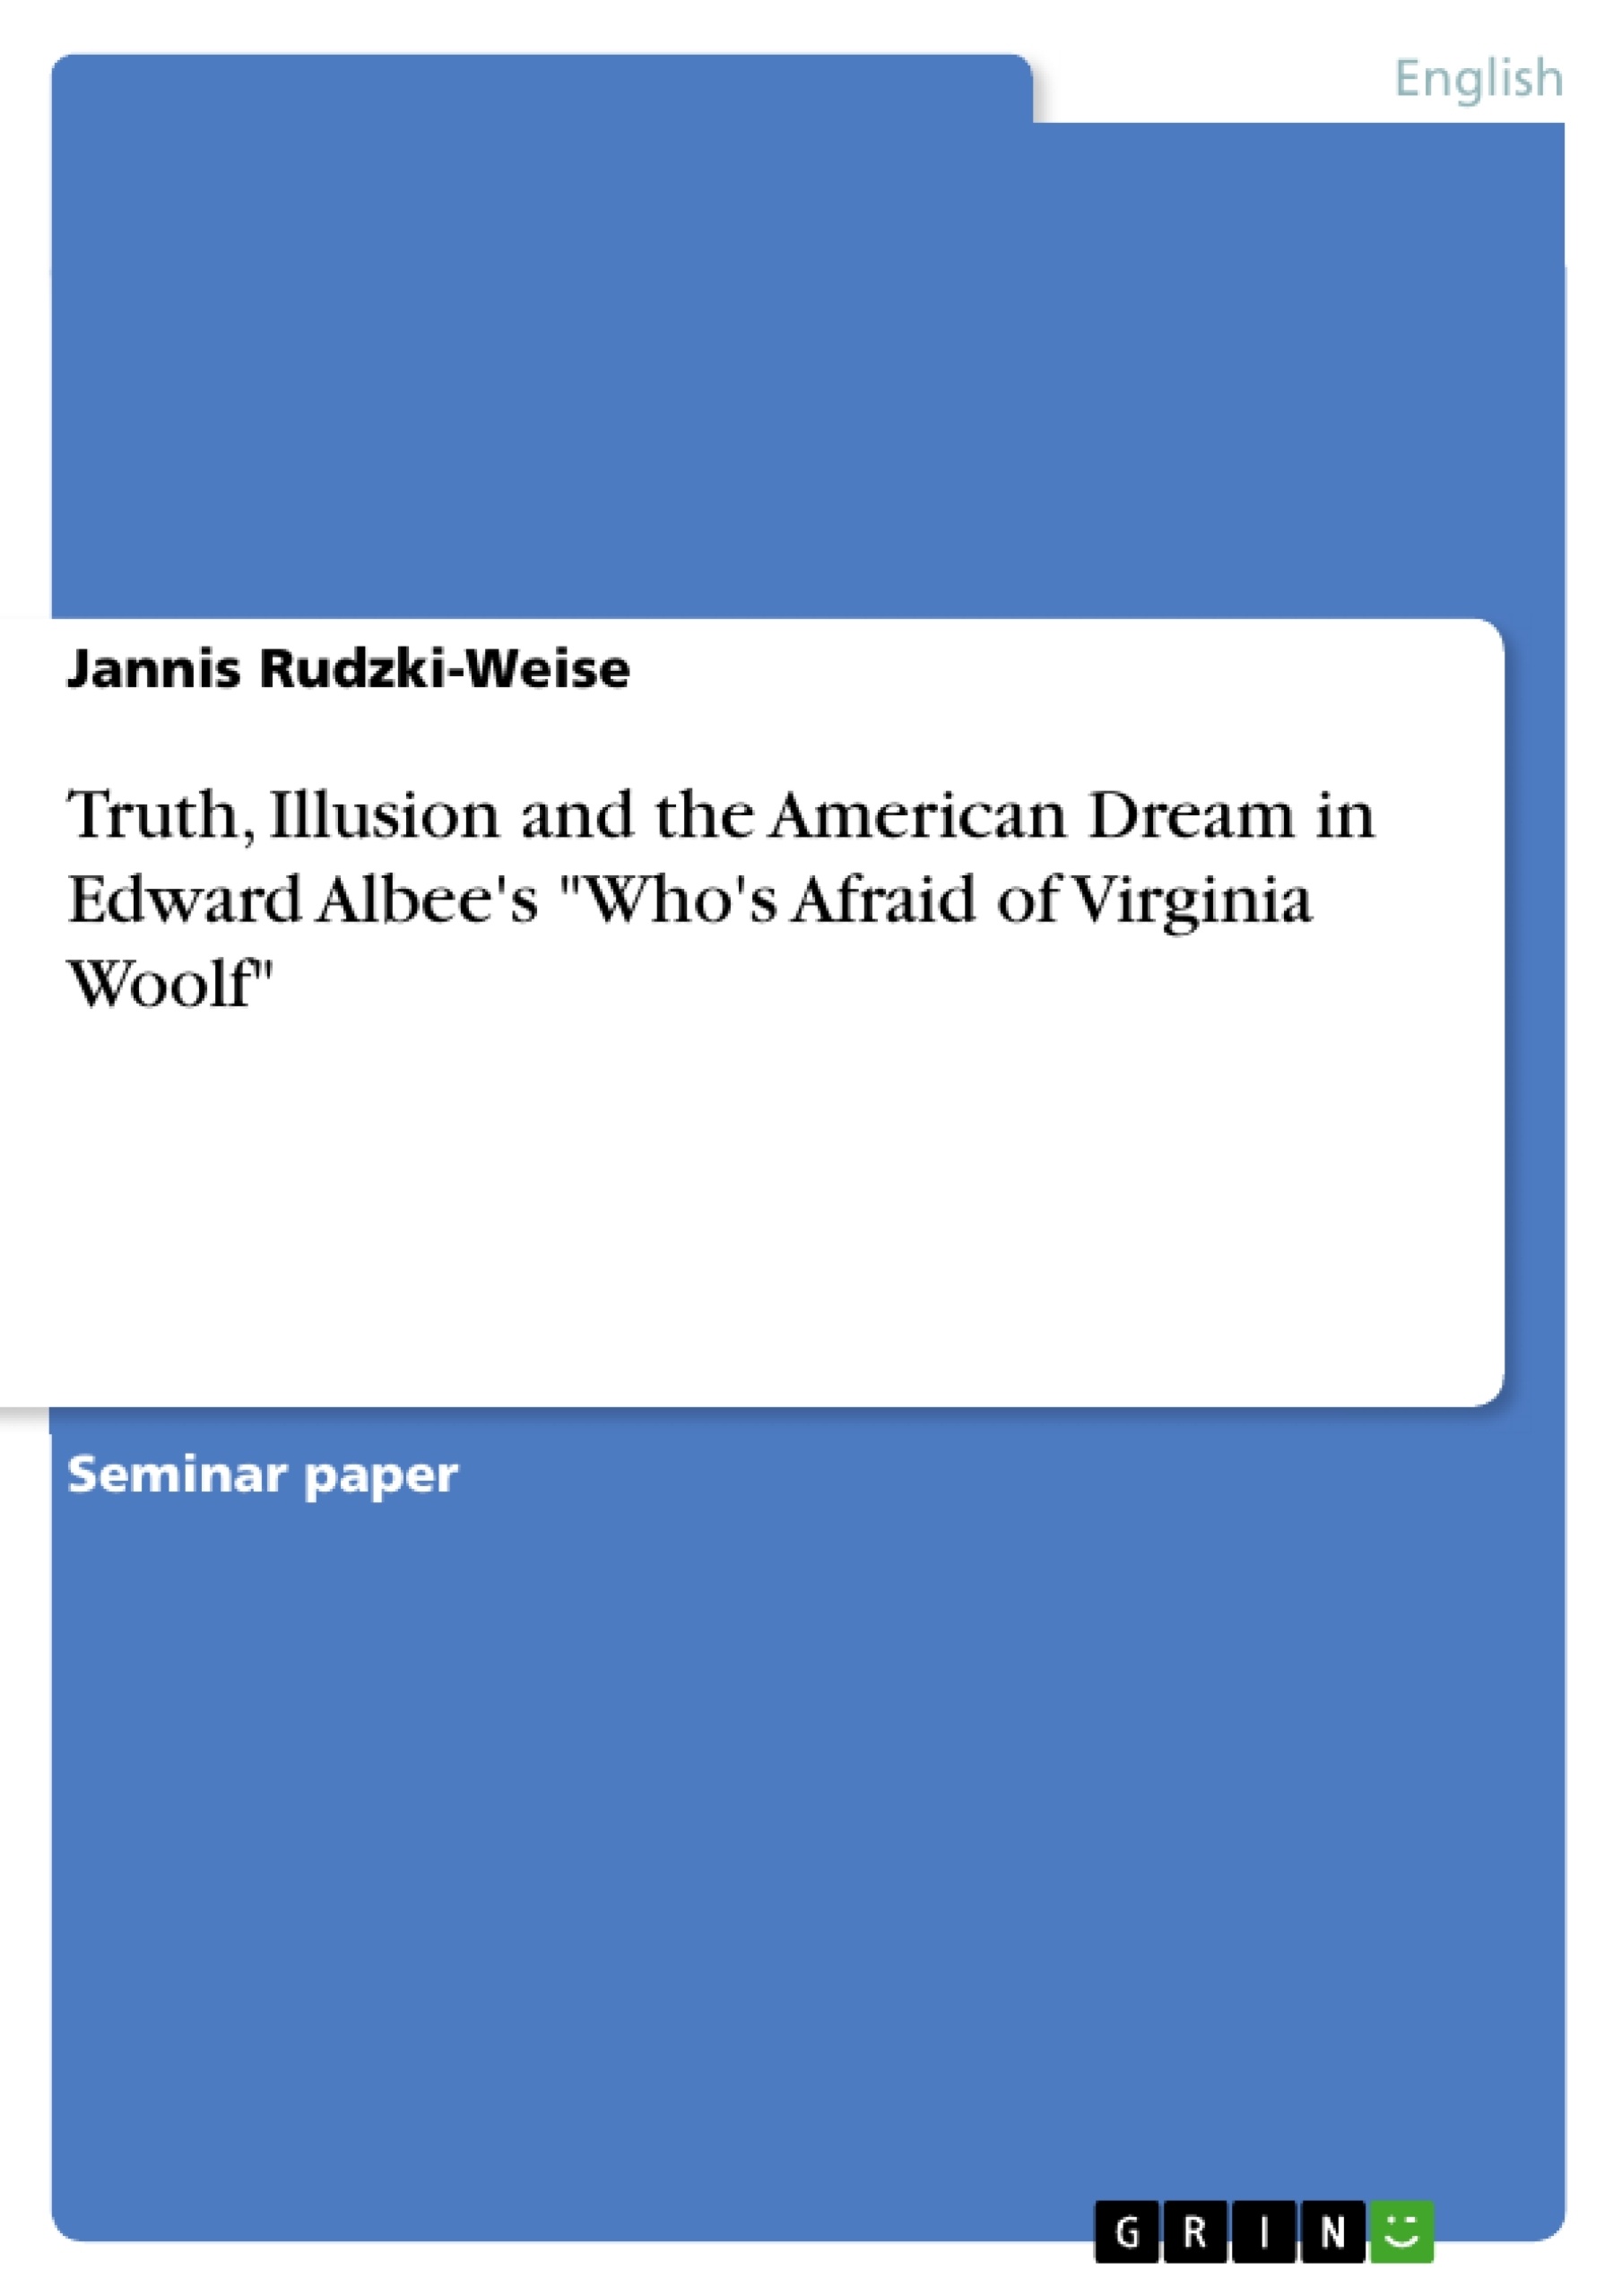 Title: Truth, Illusion and the American Dream in Edward Albee's "Who's Afraid of Virginia Woolf"